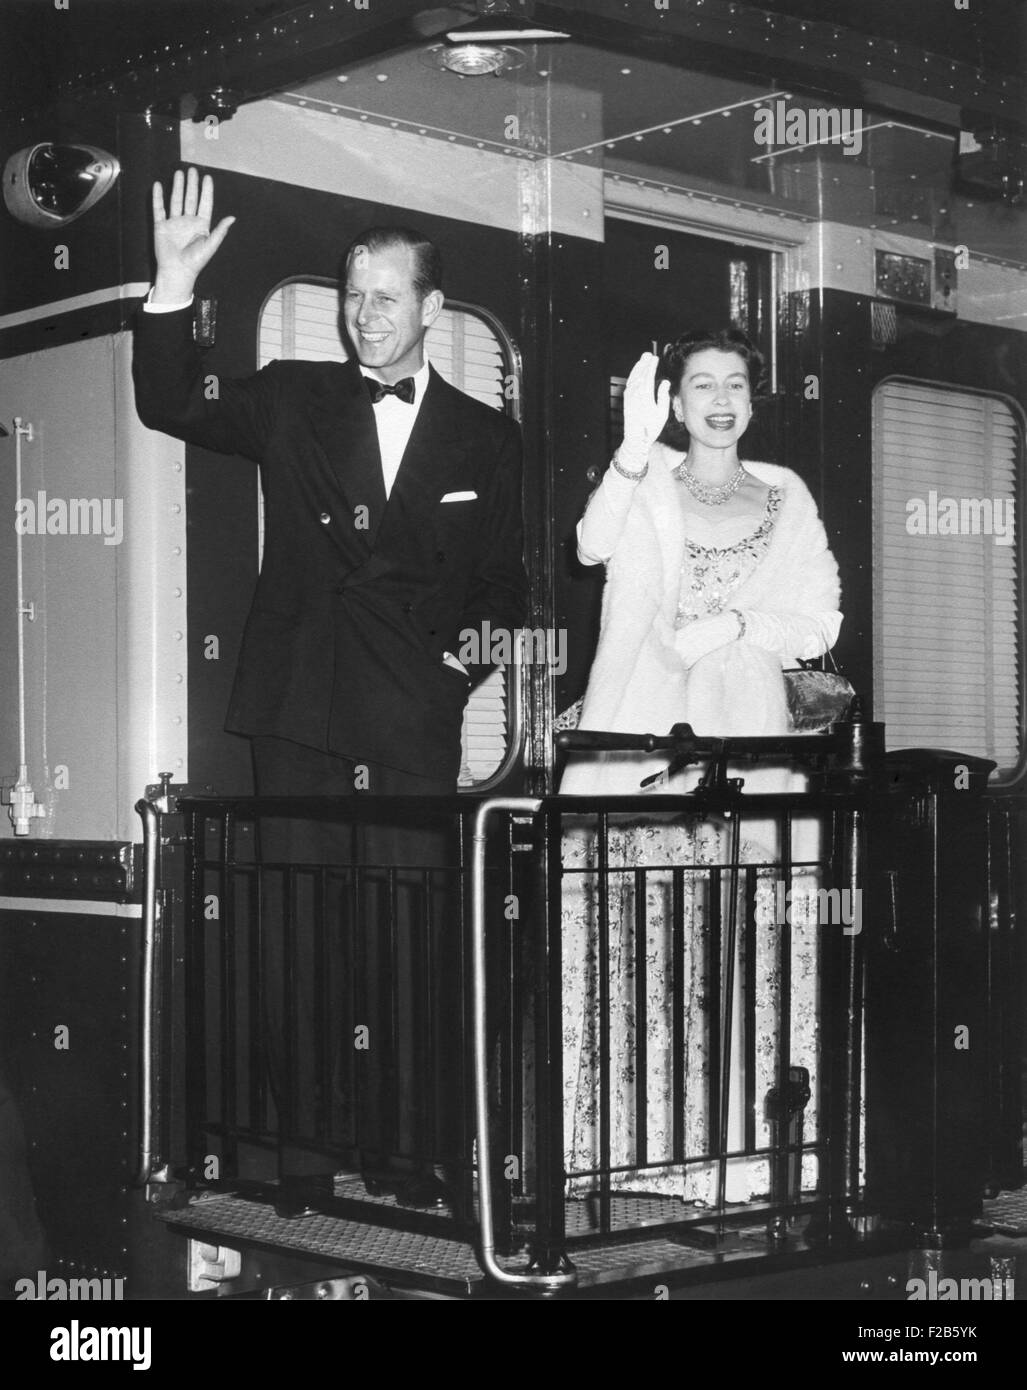 Queen Elizabeth II and Prince Philip wave from the back of a train at Union Station. After entertaining the President Eisenhower and the First Lady, they leave for New York City. Oct. 20, 1957 - (BSLOC 2014 16 217) Stock Photo